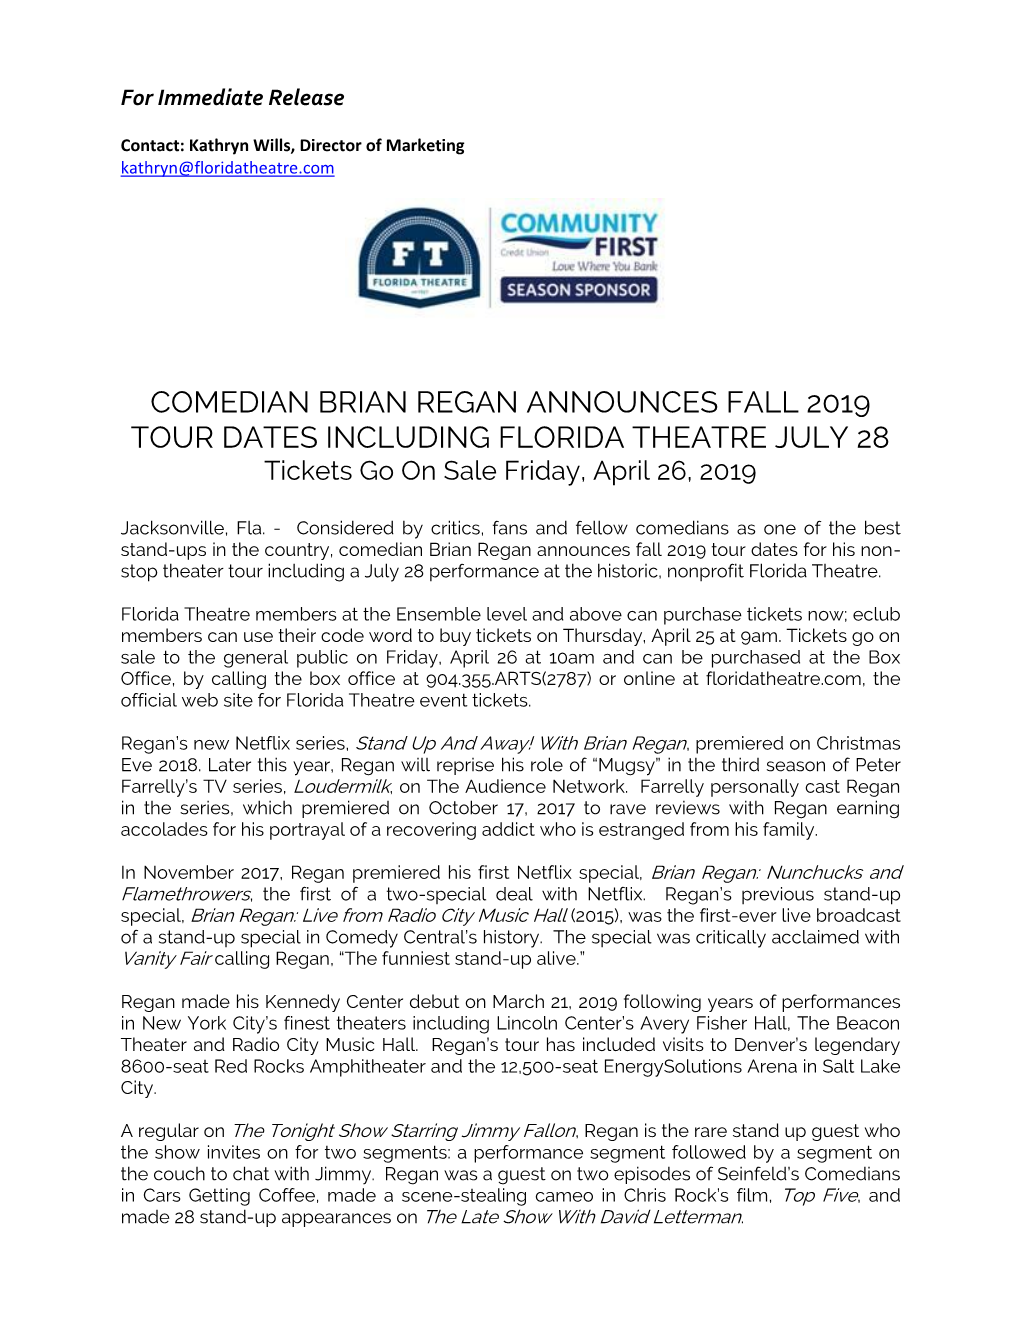 COMEDIAN BRIAN REGAN ANNOUNCES FALL 2019 TOUR DATES INCLUDING FLORIDA THEATRE JULY 28 Tickets Go on Sale Friday, April 26, 2019